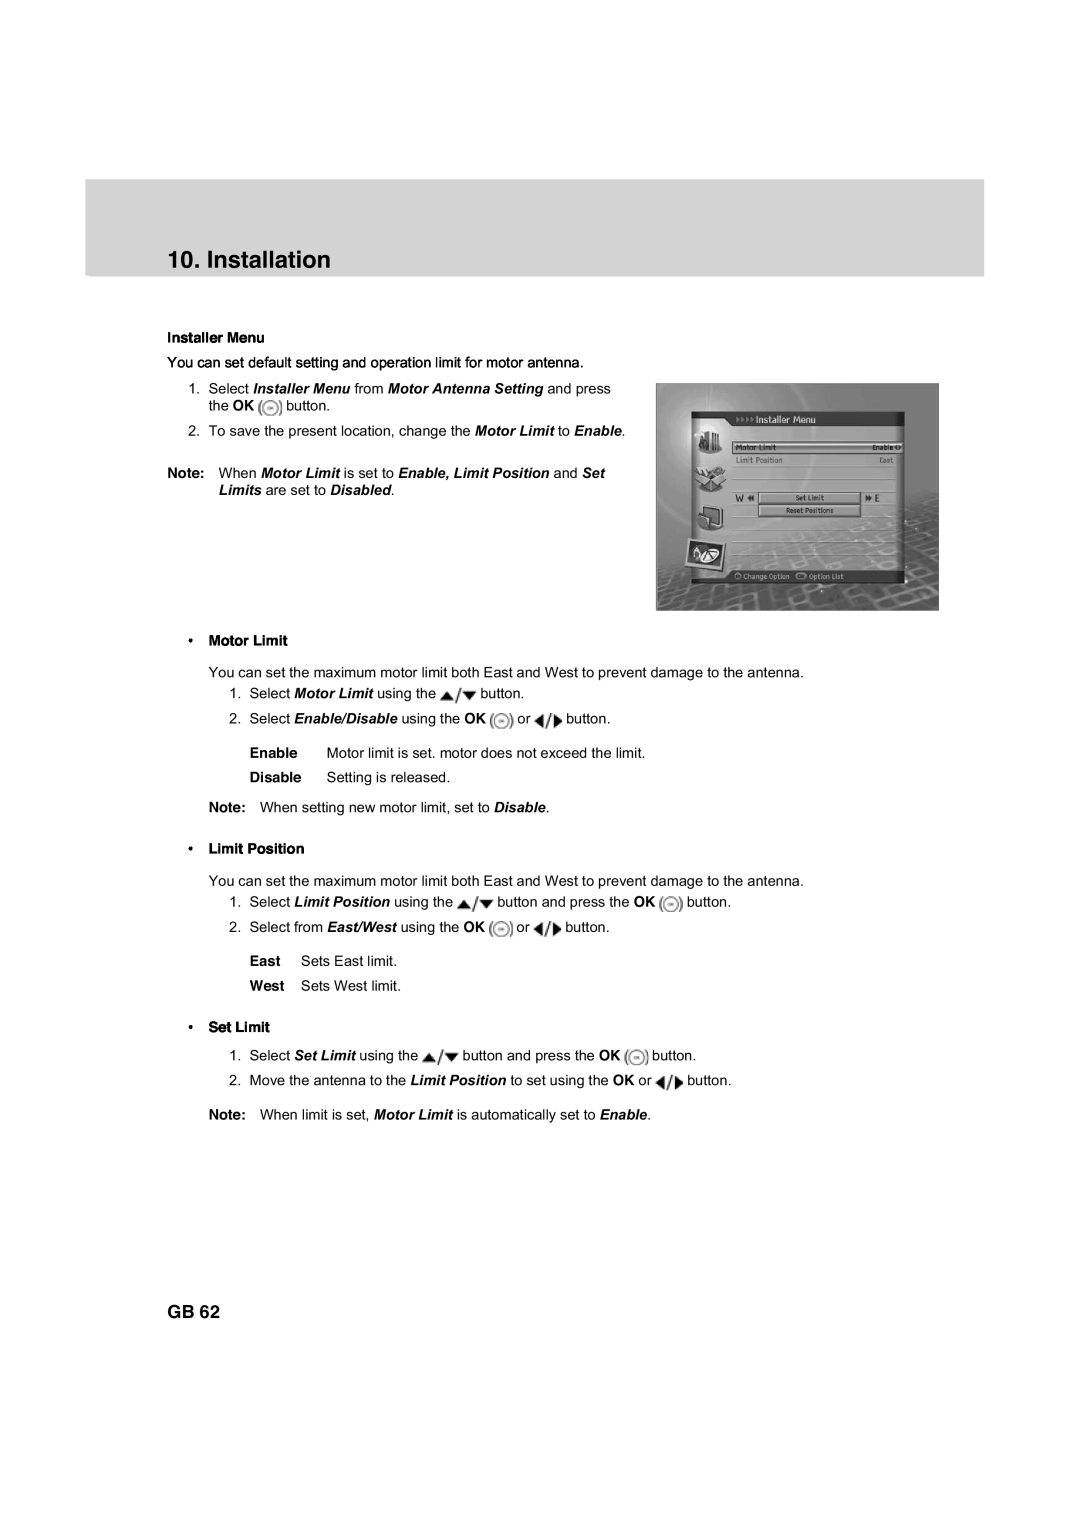 Humax HDCI-2000 Installer Menu, Note When Motor Limit is set to Enable, Limit Position and Set, Limits are set to Disabled 